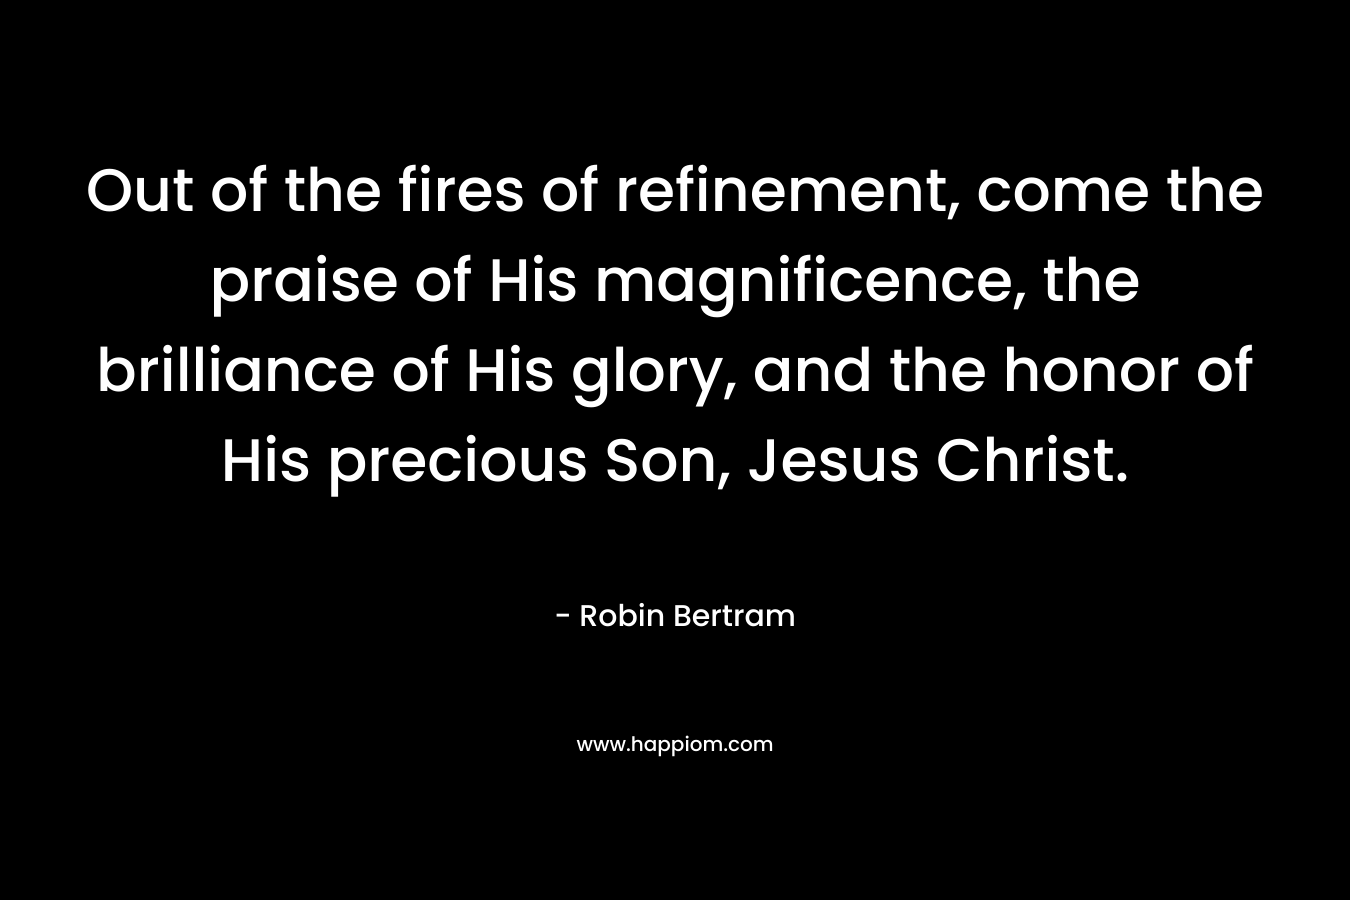 Out of the fires of refinement, come the praise of His magnificence, the brilliance of His glory, and the honor of His precious Son, Jesus Christ.